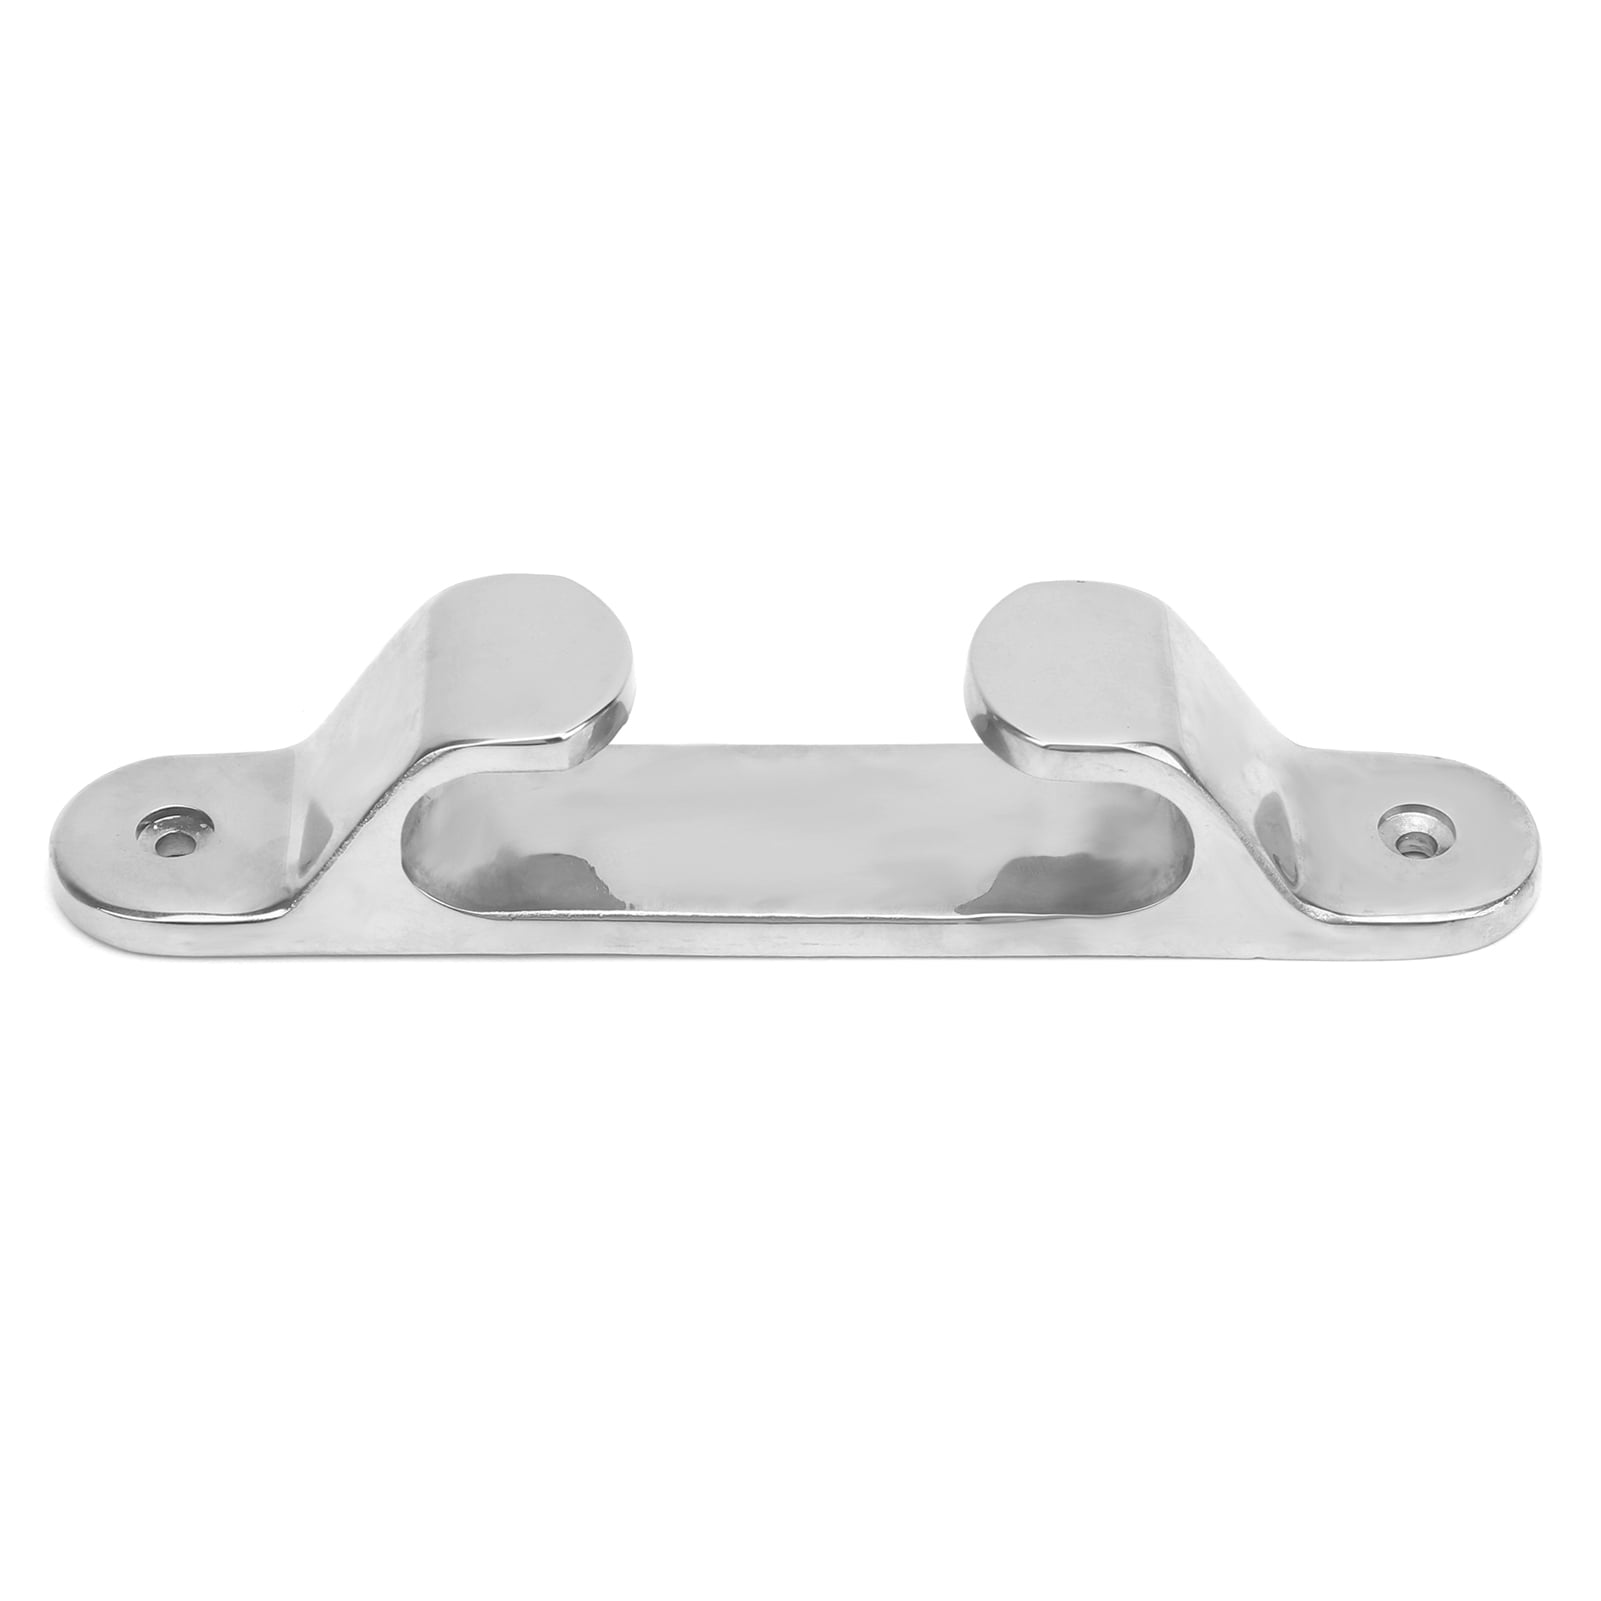 6" Bow Chock Straight Fairlead Boat Cleat Dock Deck Cleat Mooring Hardware